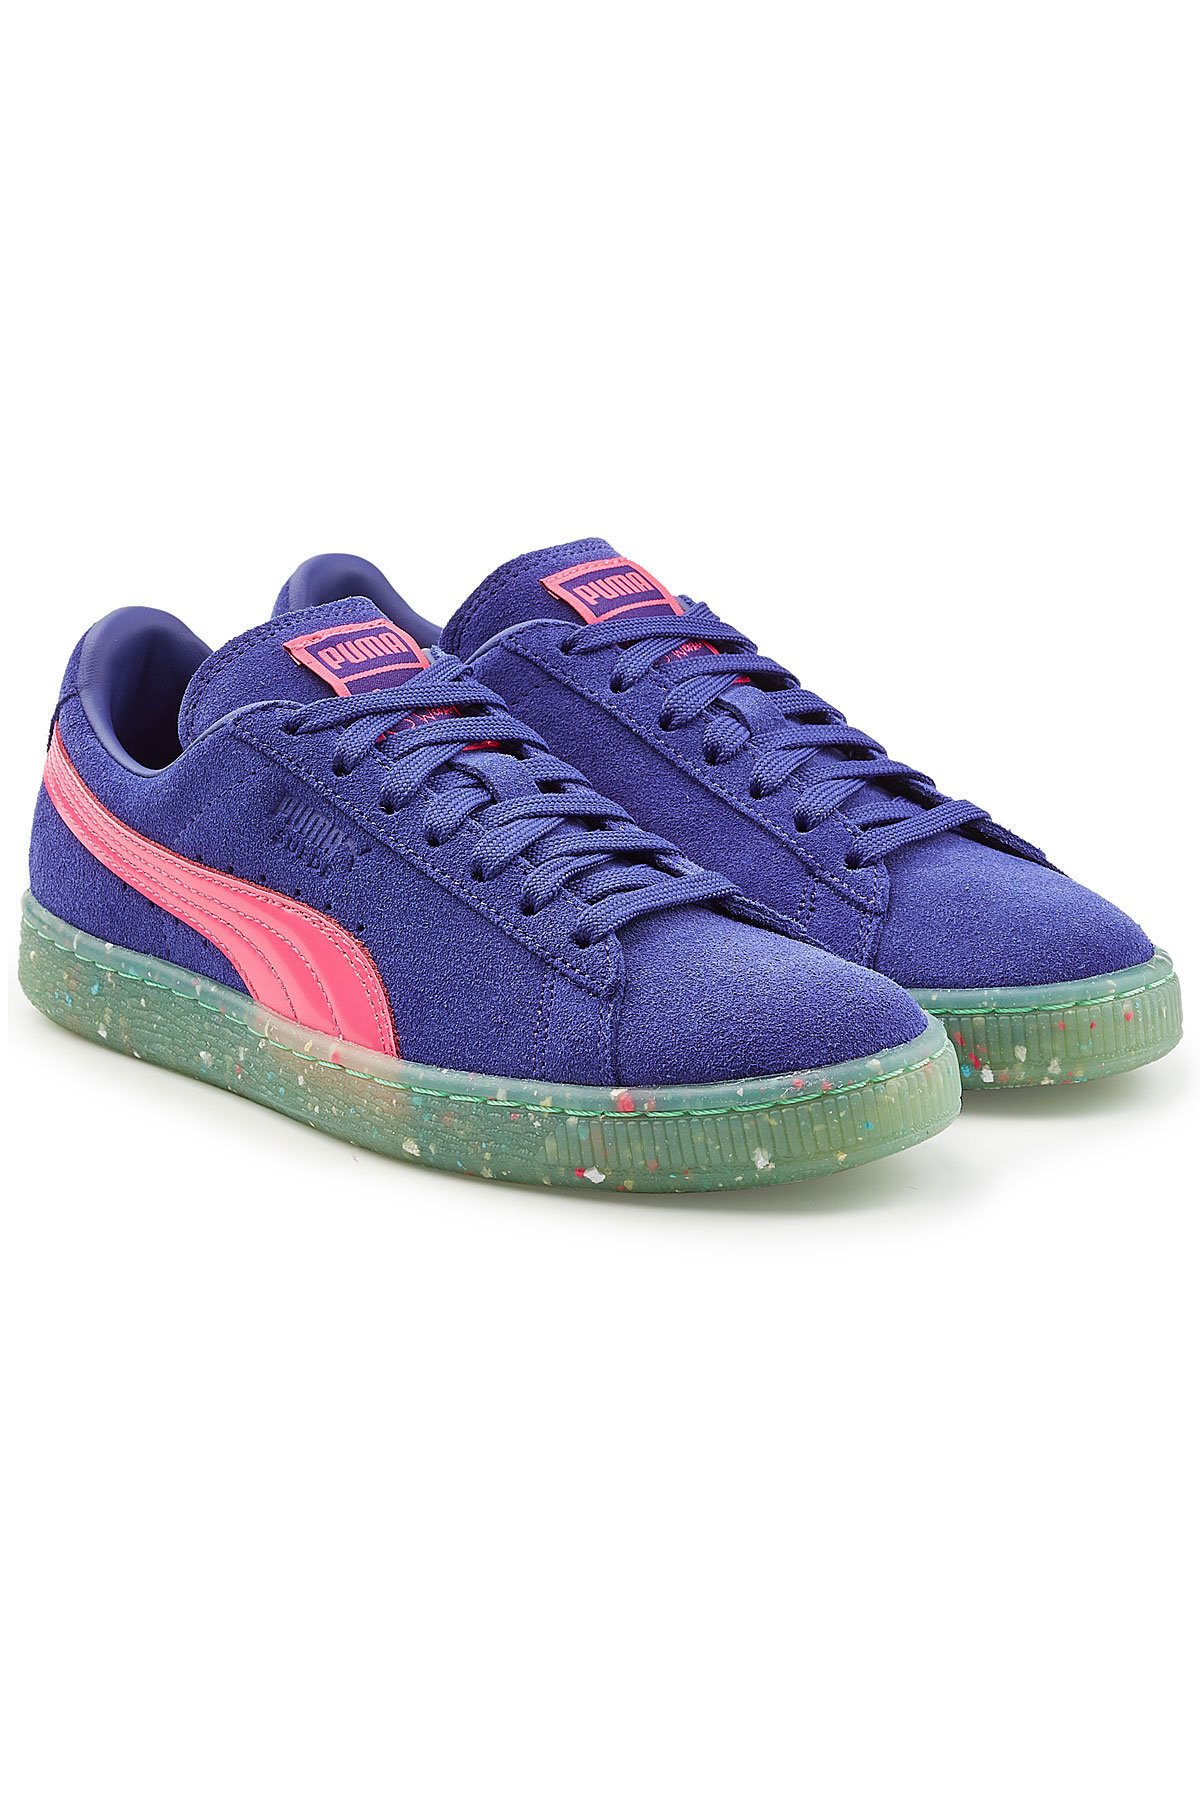 Puma - Classic Sneakers with Leather and Suede